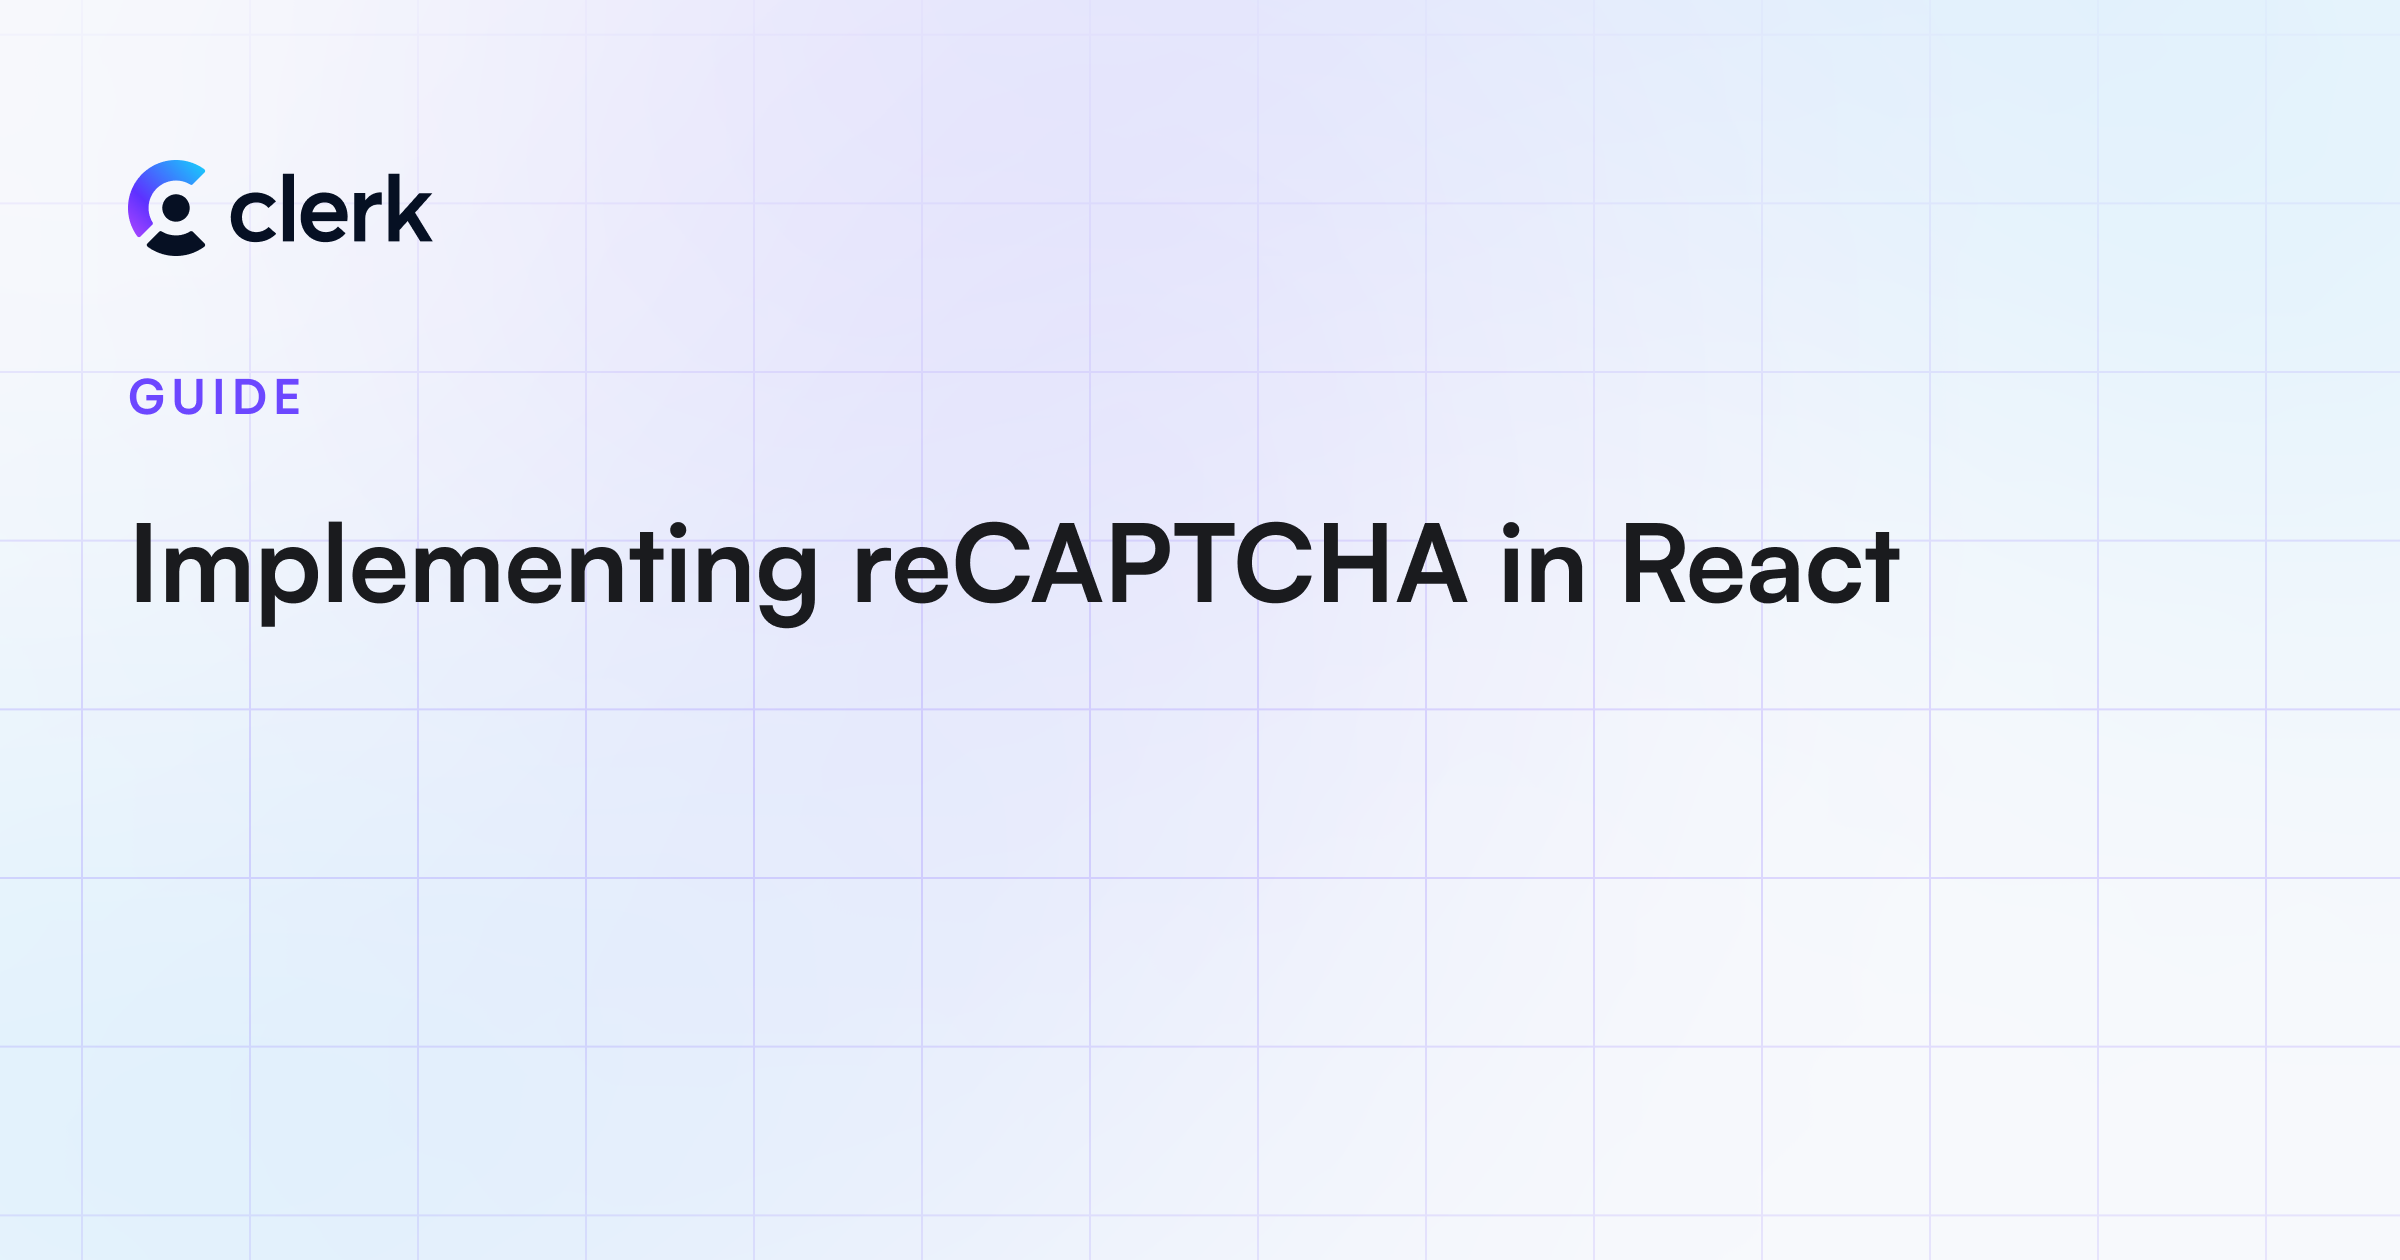 Implementing reCAPTCHA in React